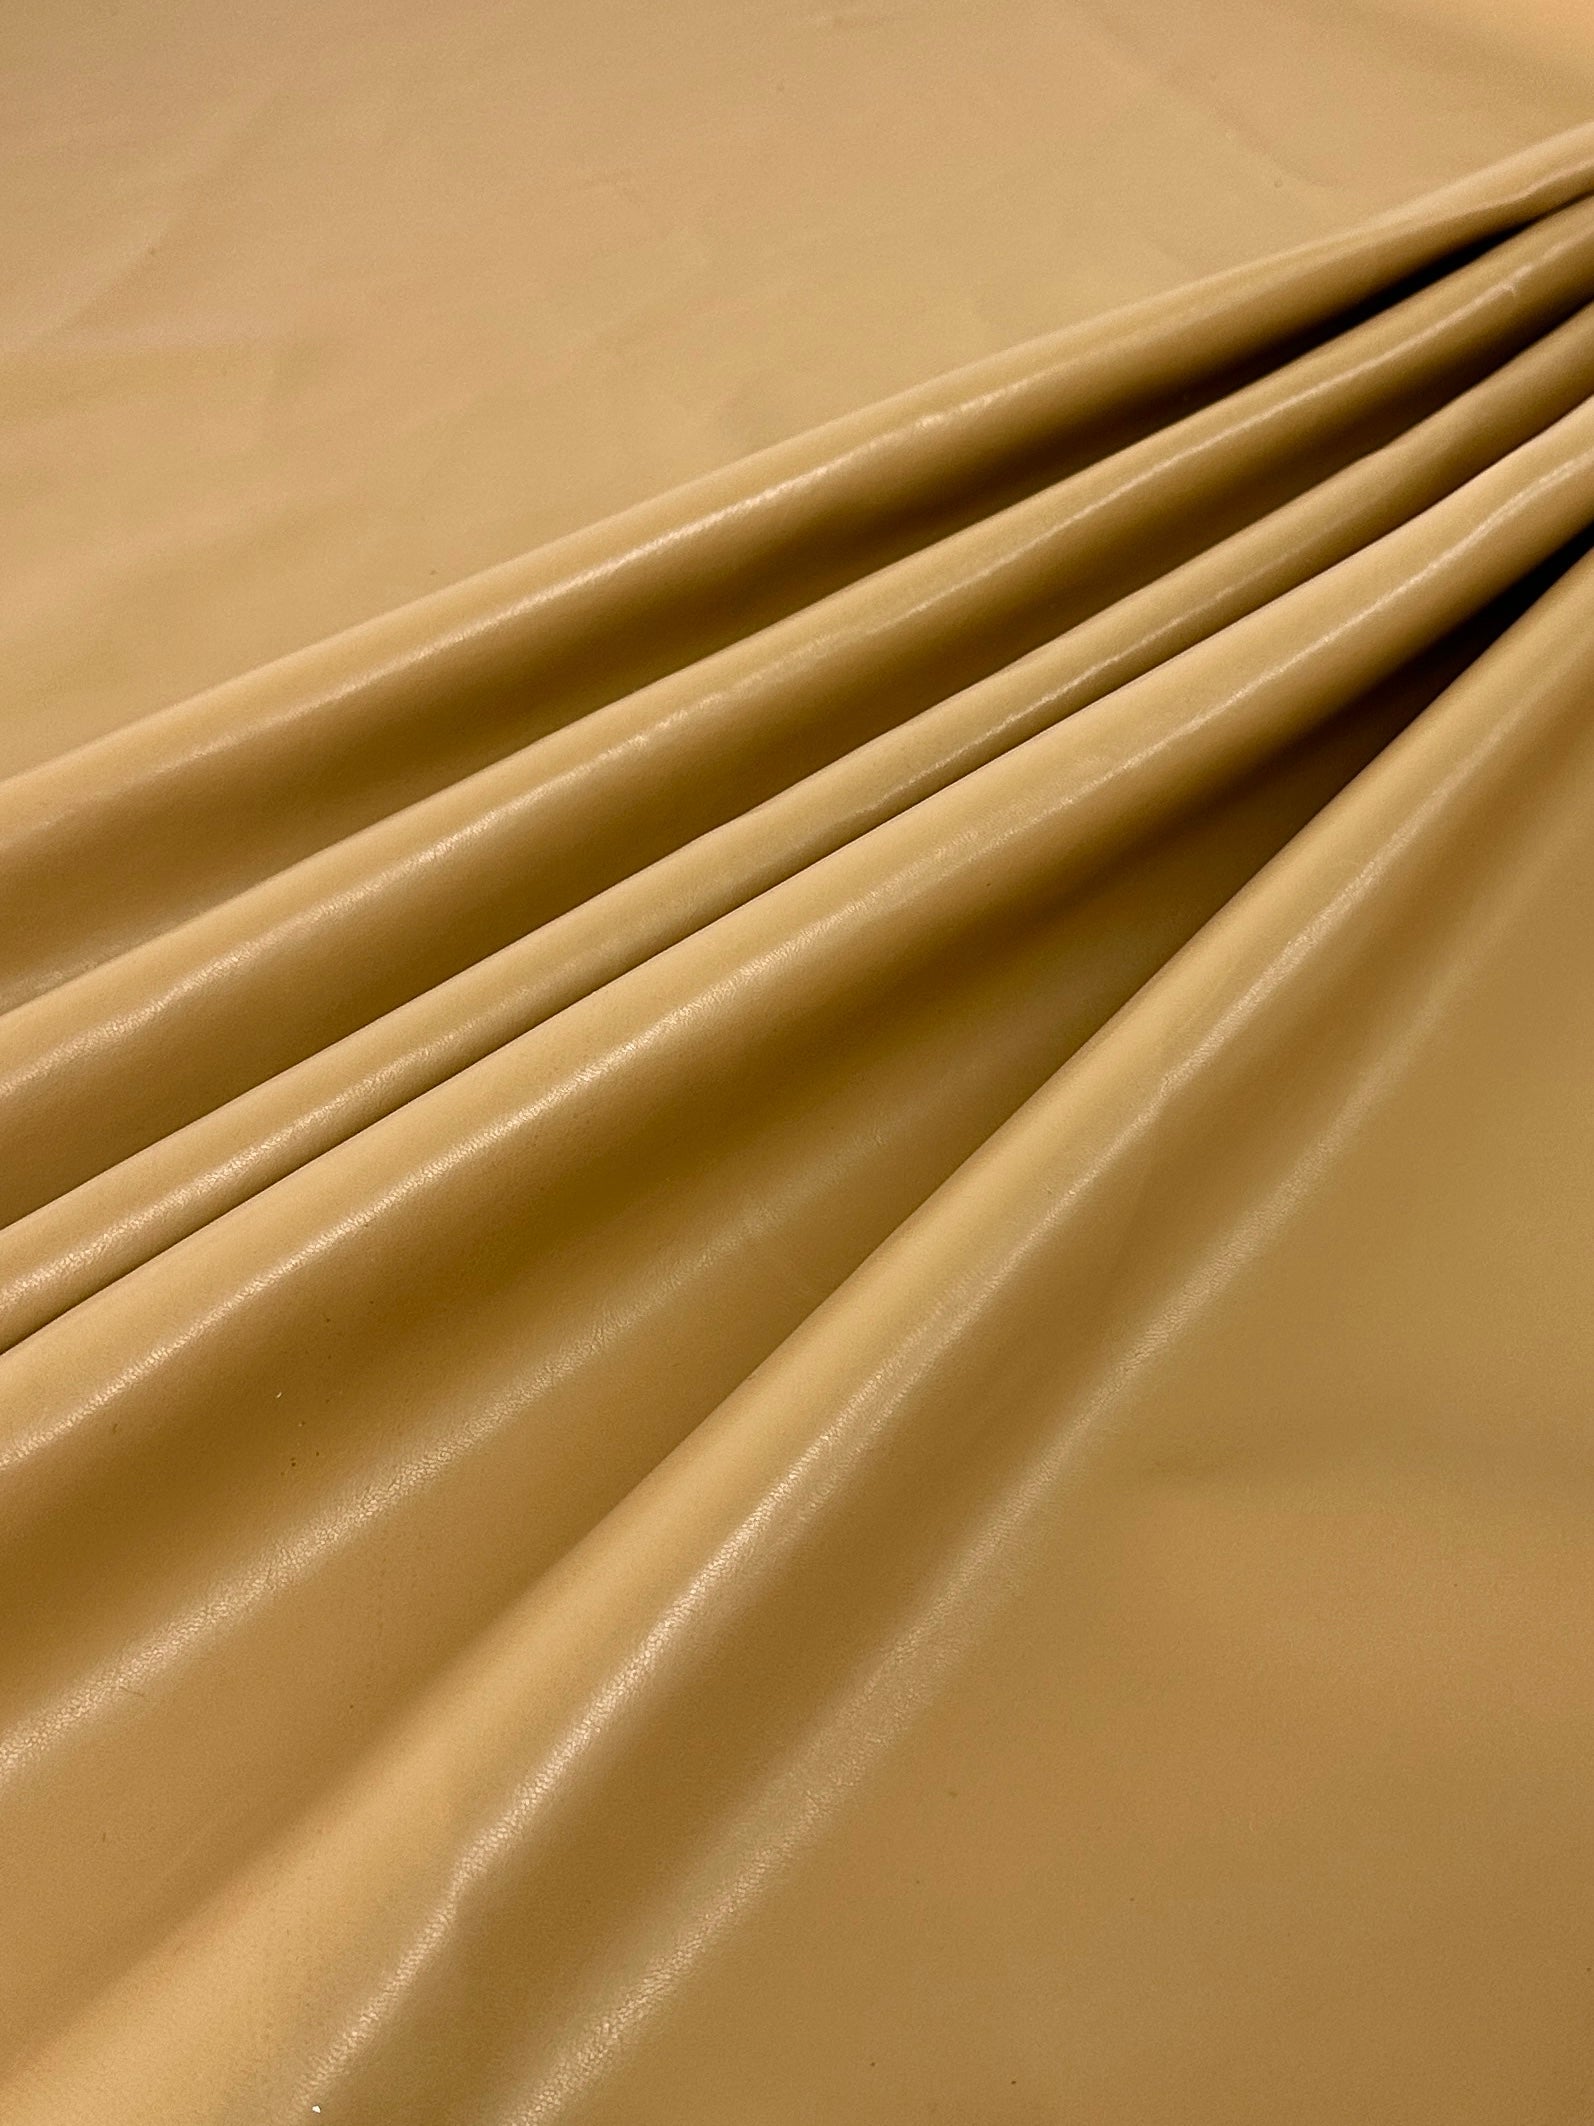 caramel Stretch Faux Leather, light brown stretch faux leather, cream color stretch faux leather, faux leather for woman, faux leather for costumes, faux leather for home decor, 2 way stretch faux leather, leather for blazers, cheap leather, discounted leather, leather on sale